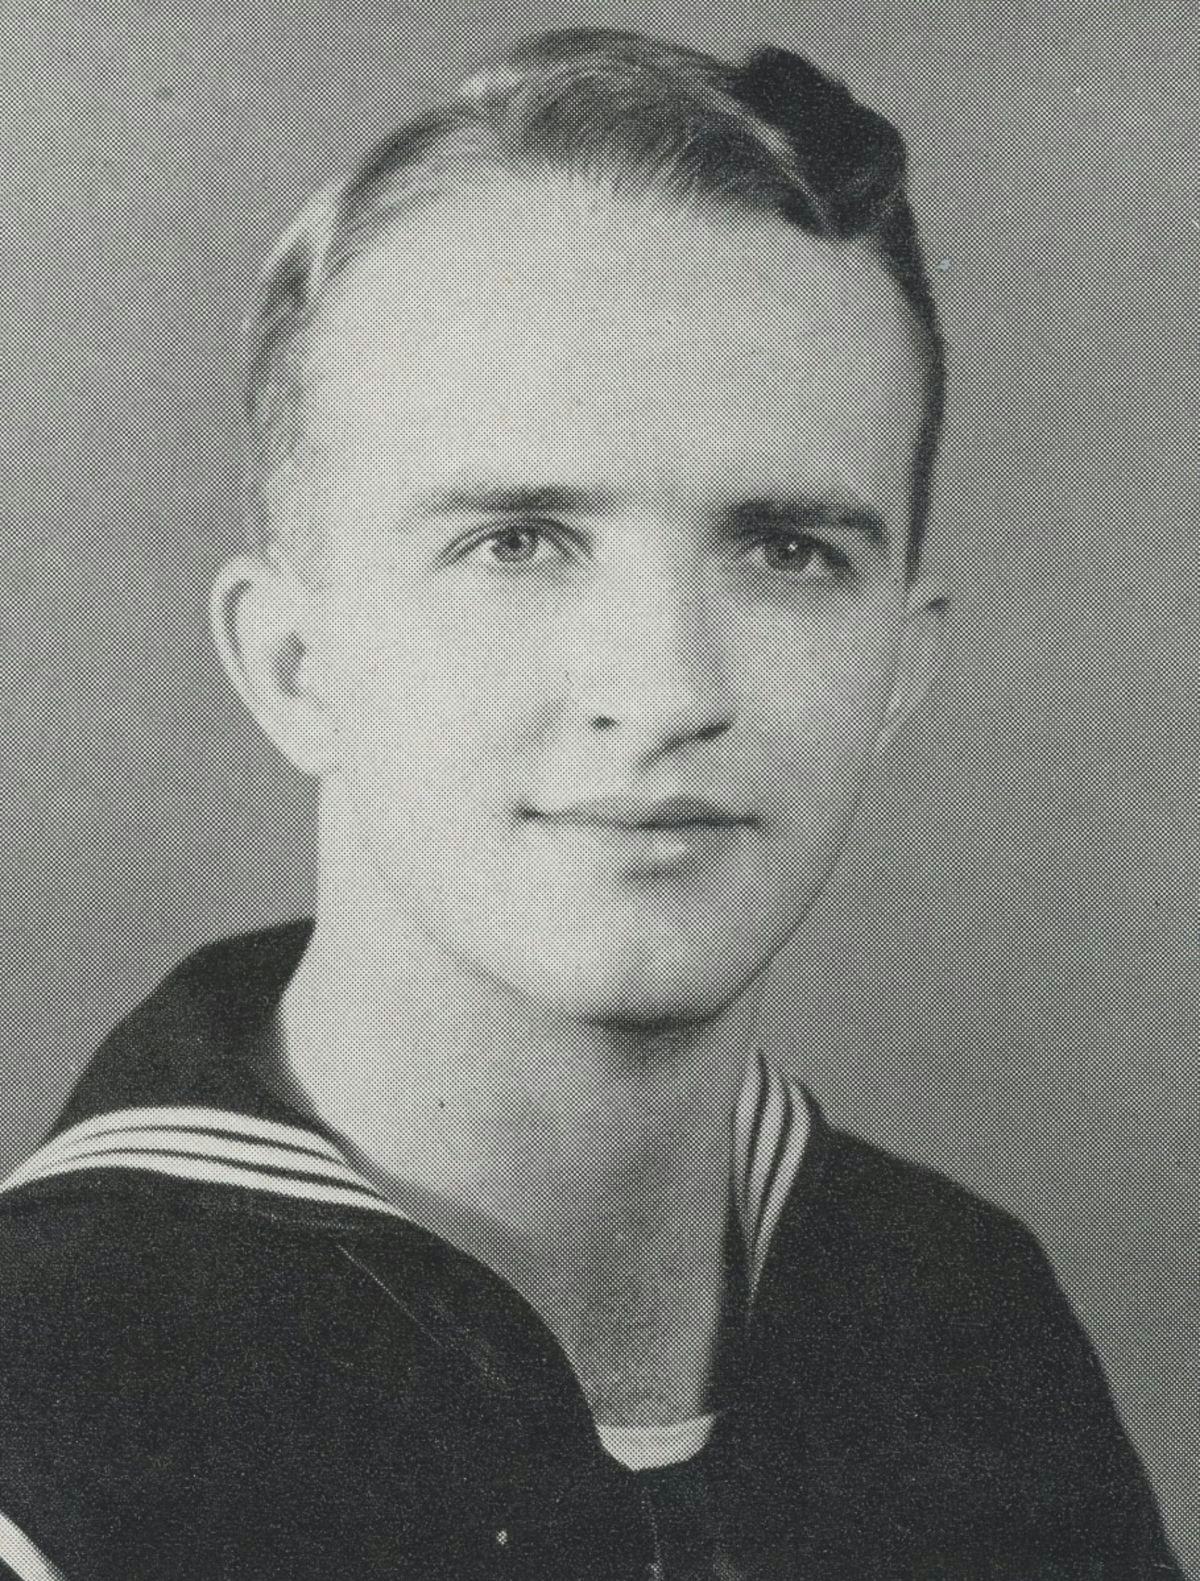 Joe Schneider ’46, in The Link yearbook. A member of the Navy V-12, Schneider was a proud veteran of World War II, serving in the Pacific Theatre.